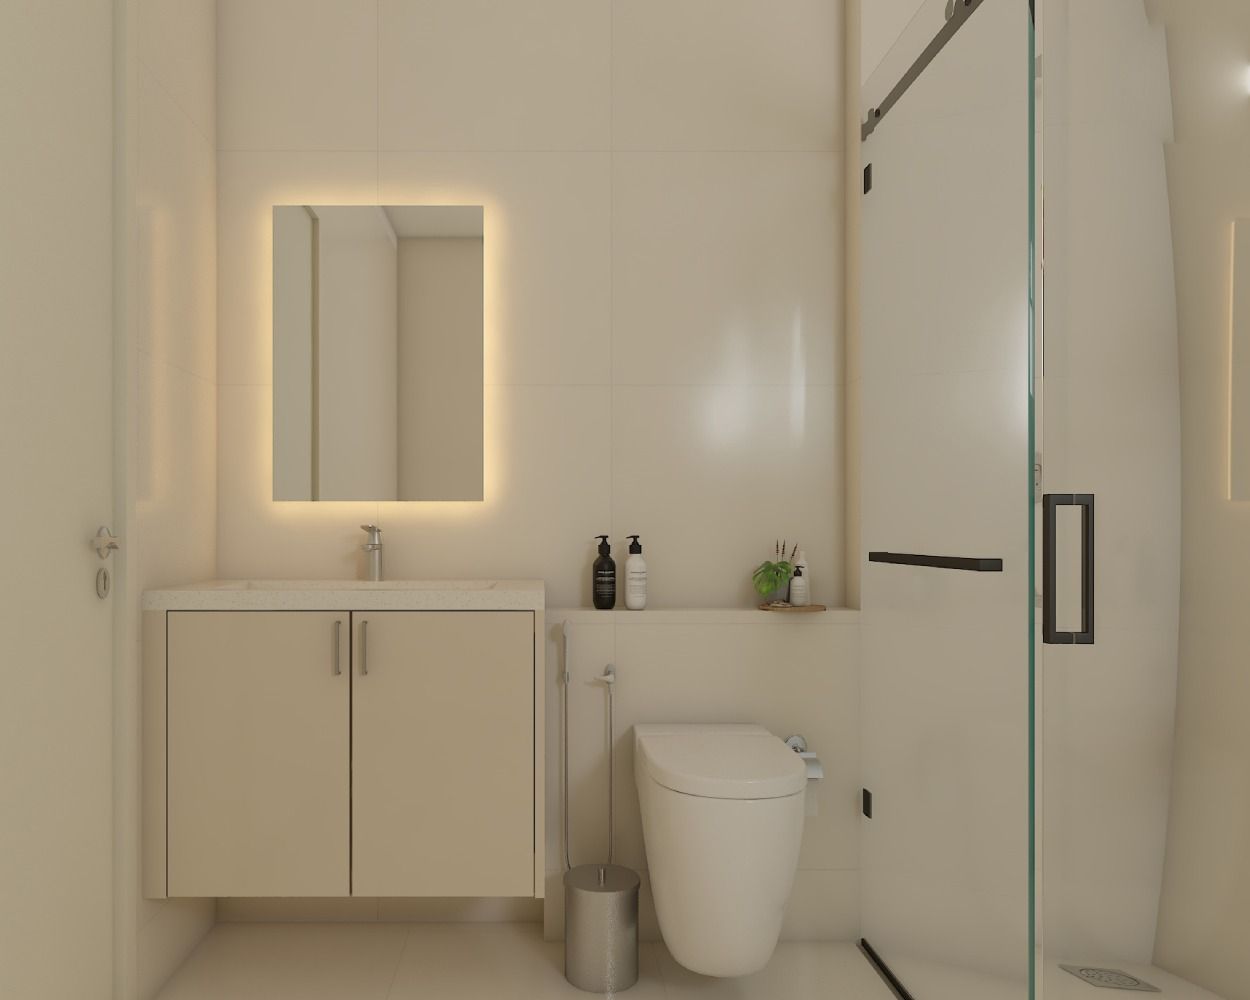 Minimalist Small Bathroom Idea With A Backlit Mirror And Wall-Mounted Storage